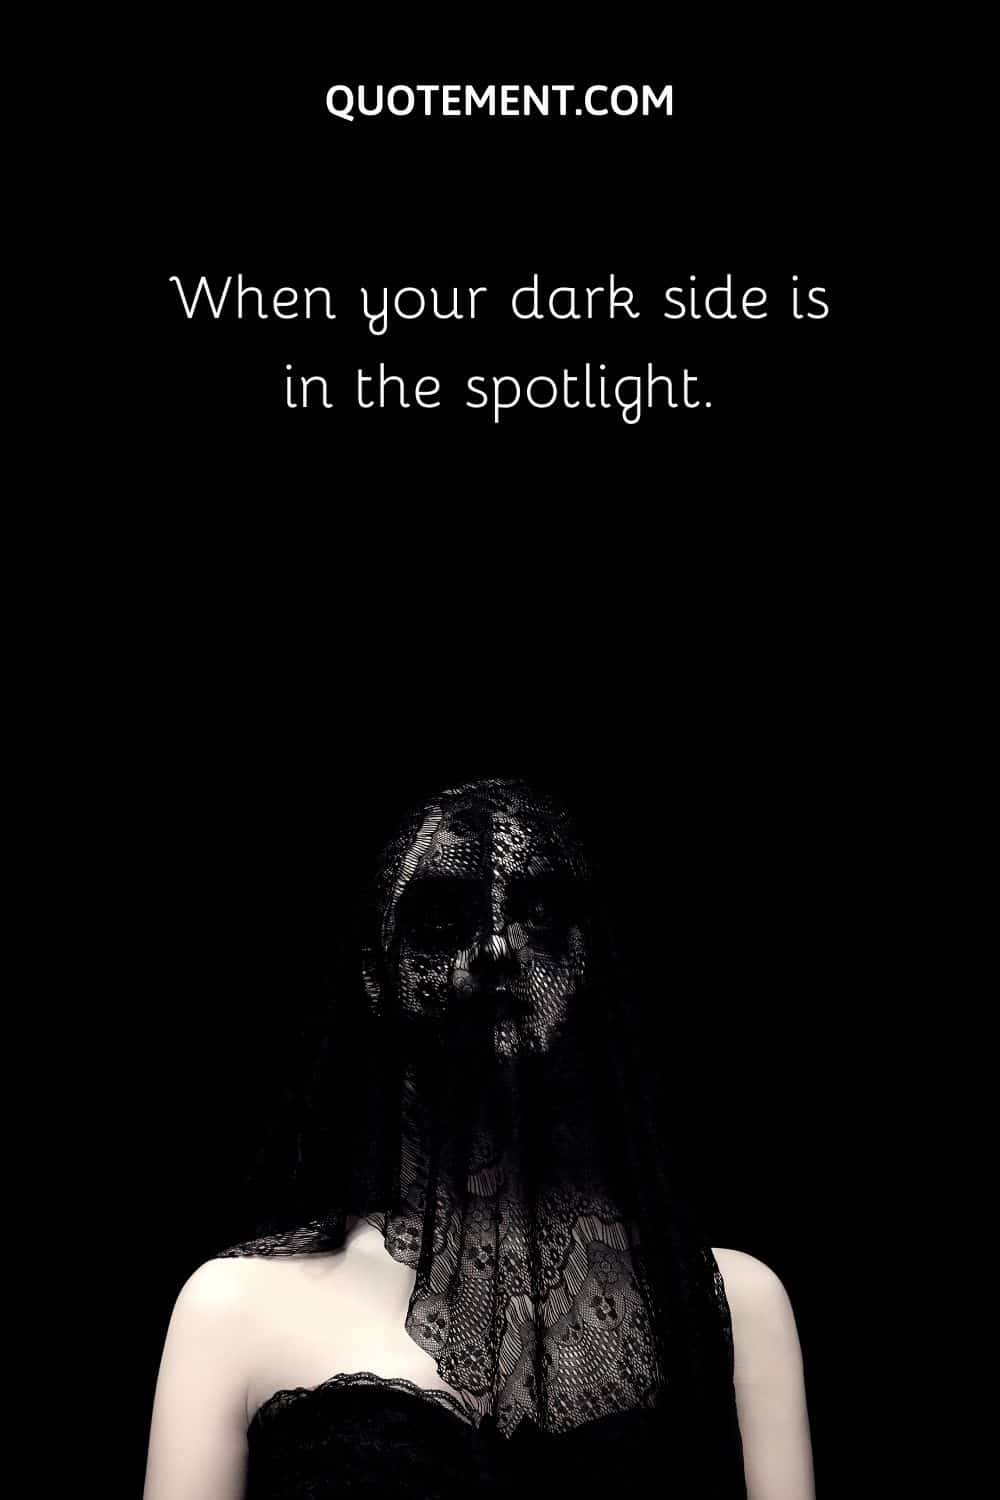 When your dark side is in the spotlight